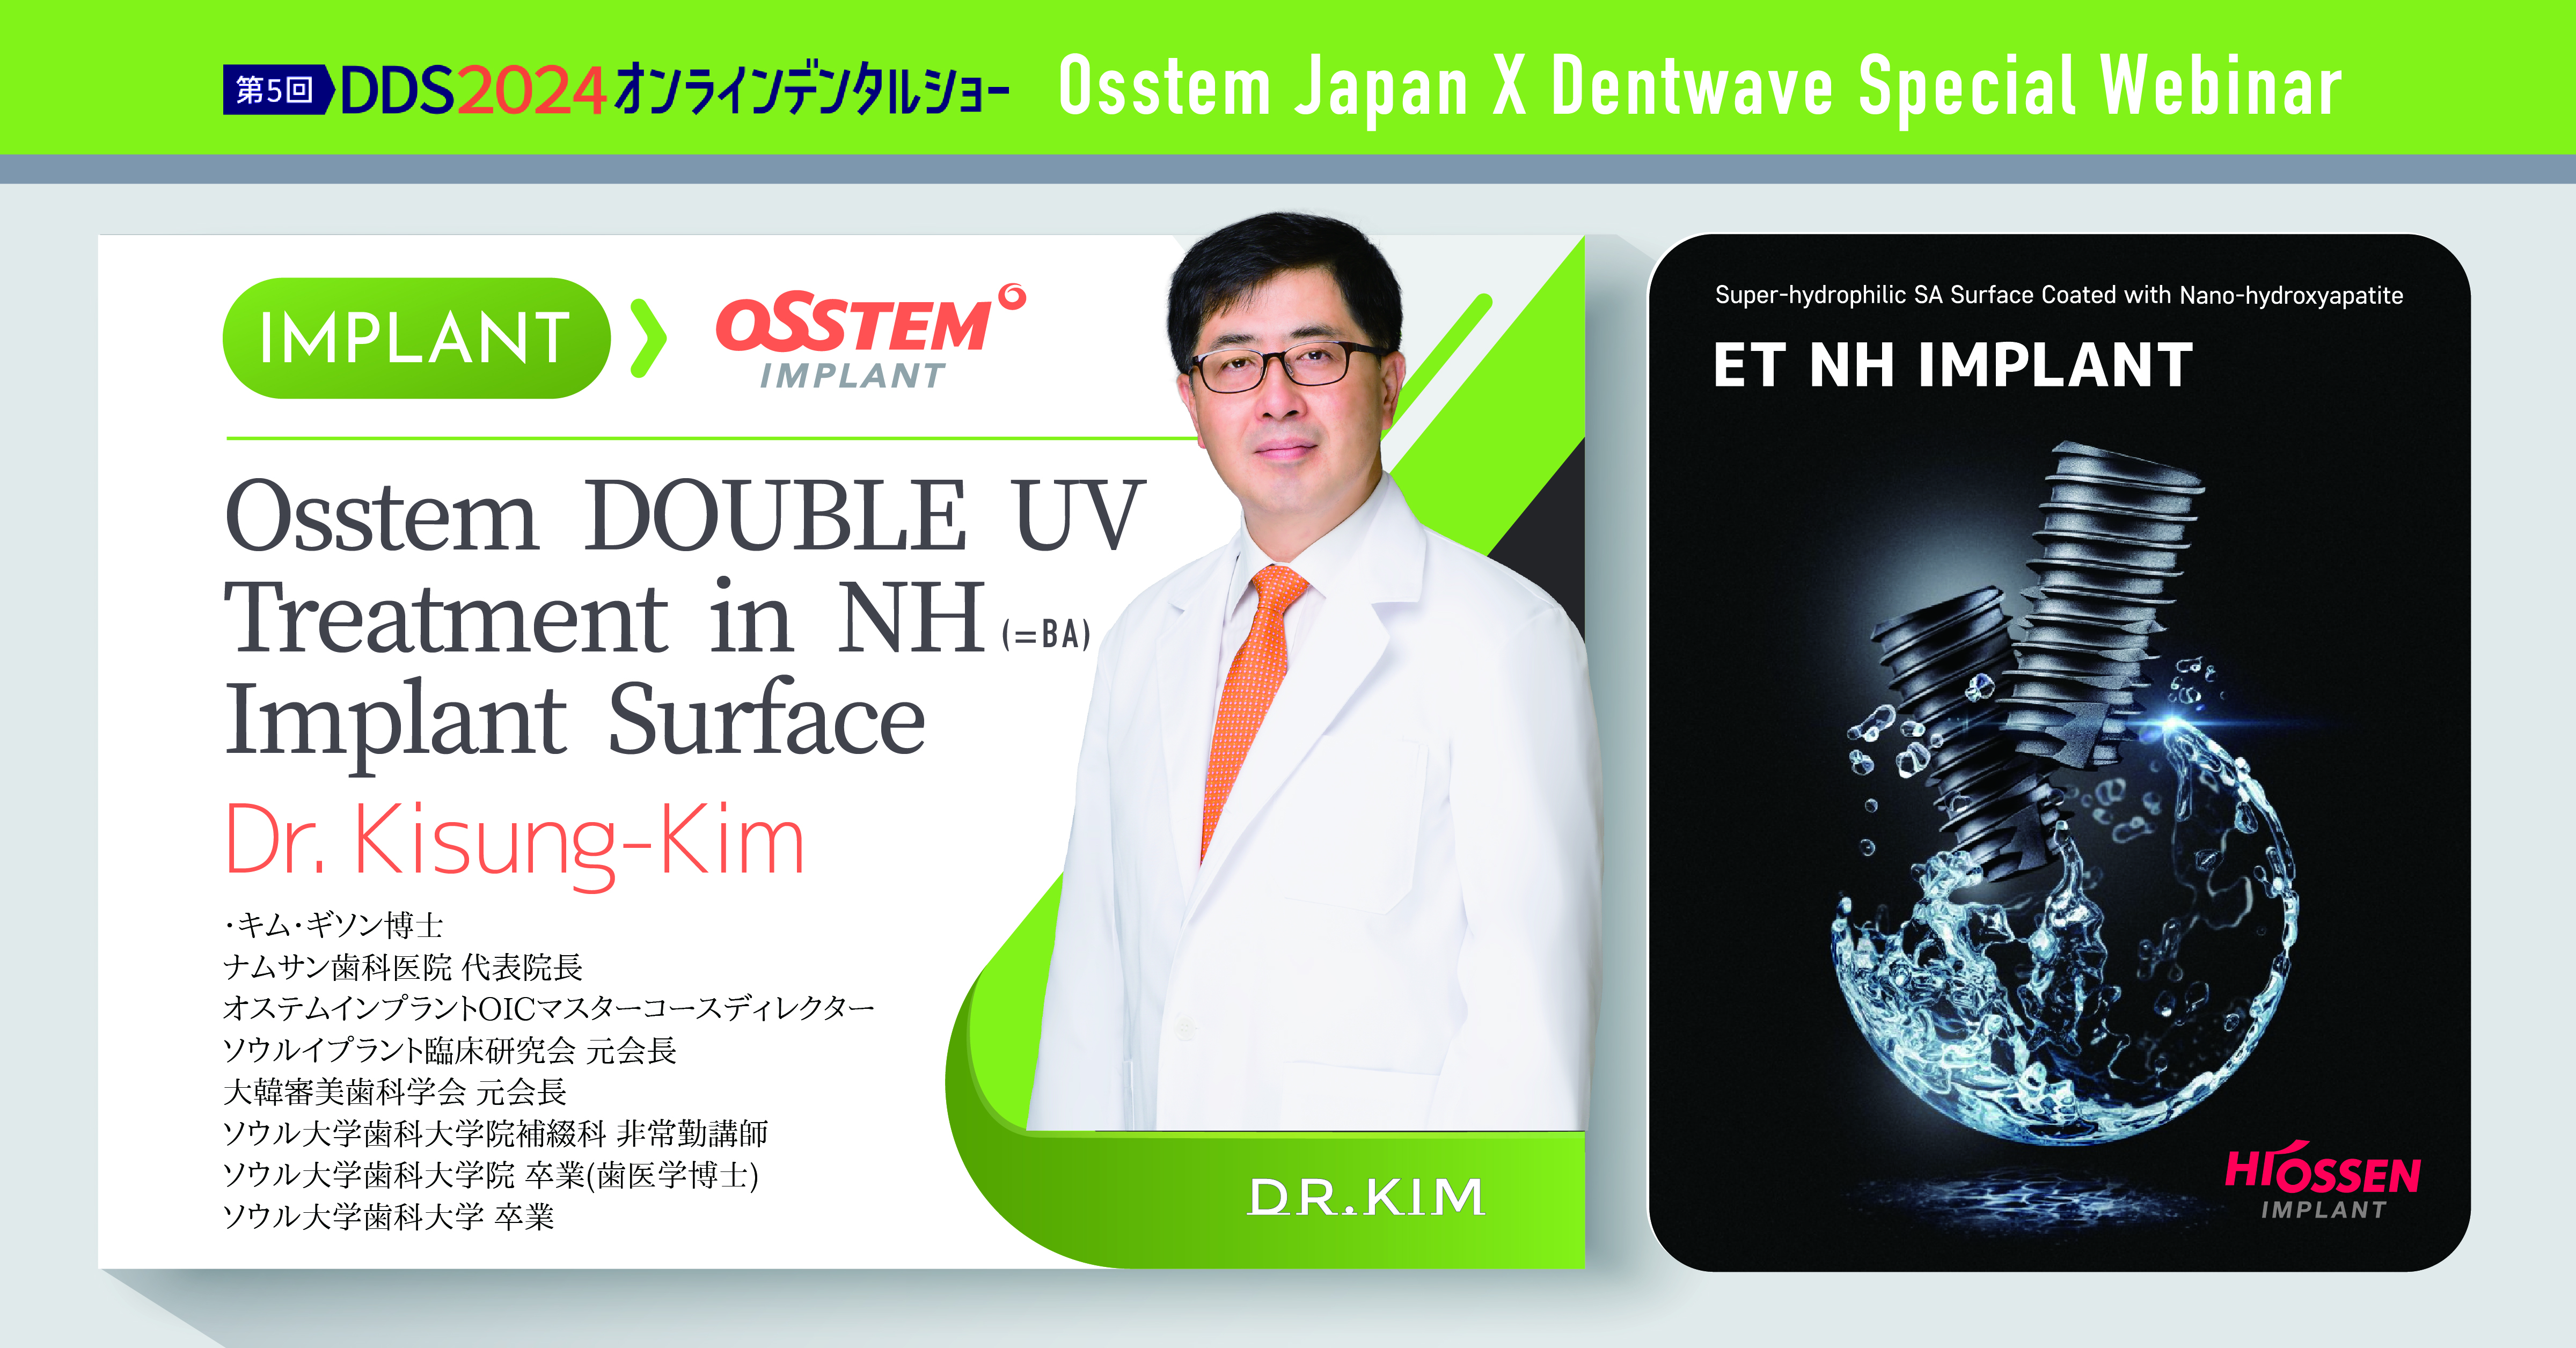 Osstem DOUBLE UV Treatment in NH Implant Surface